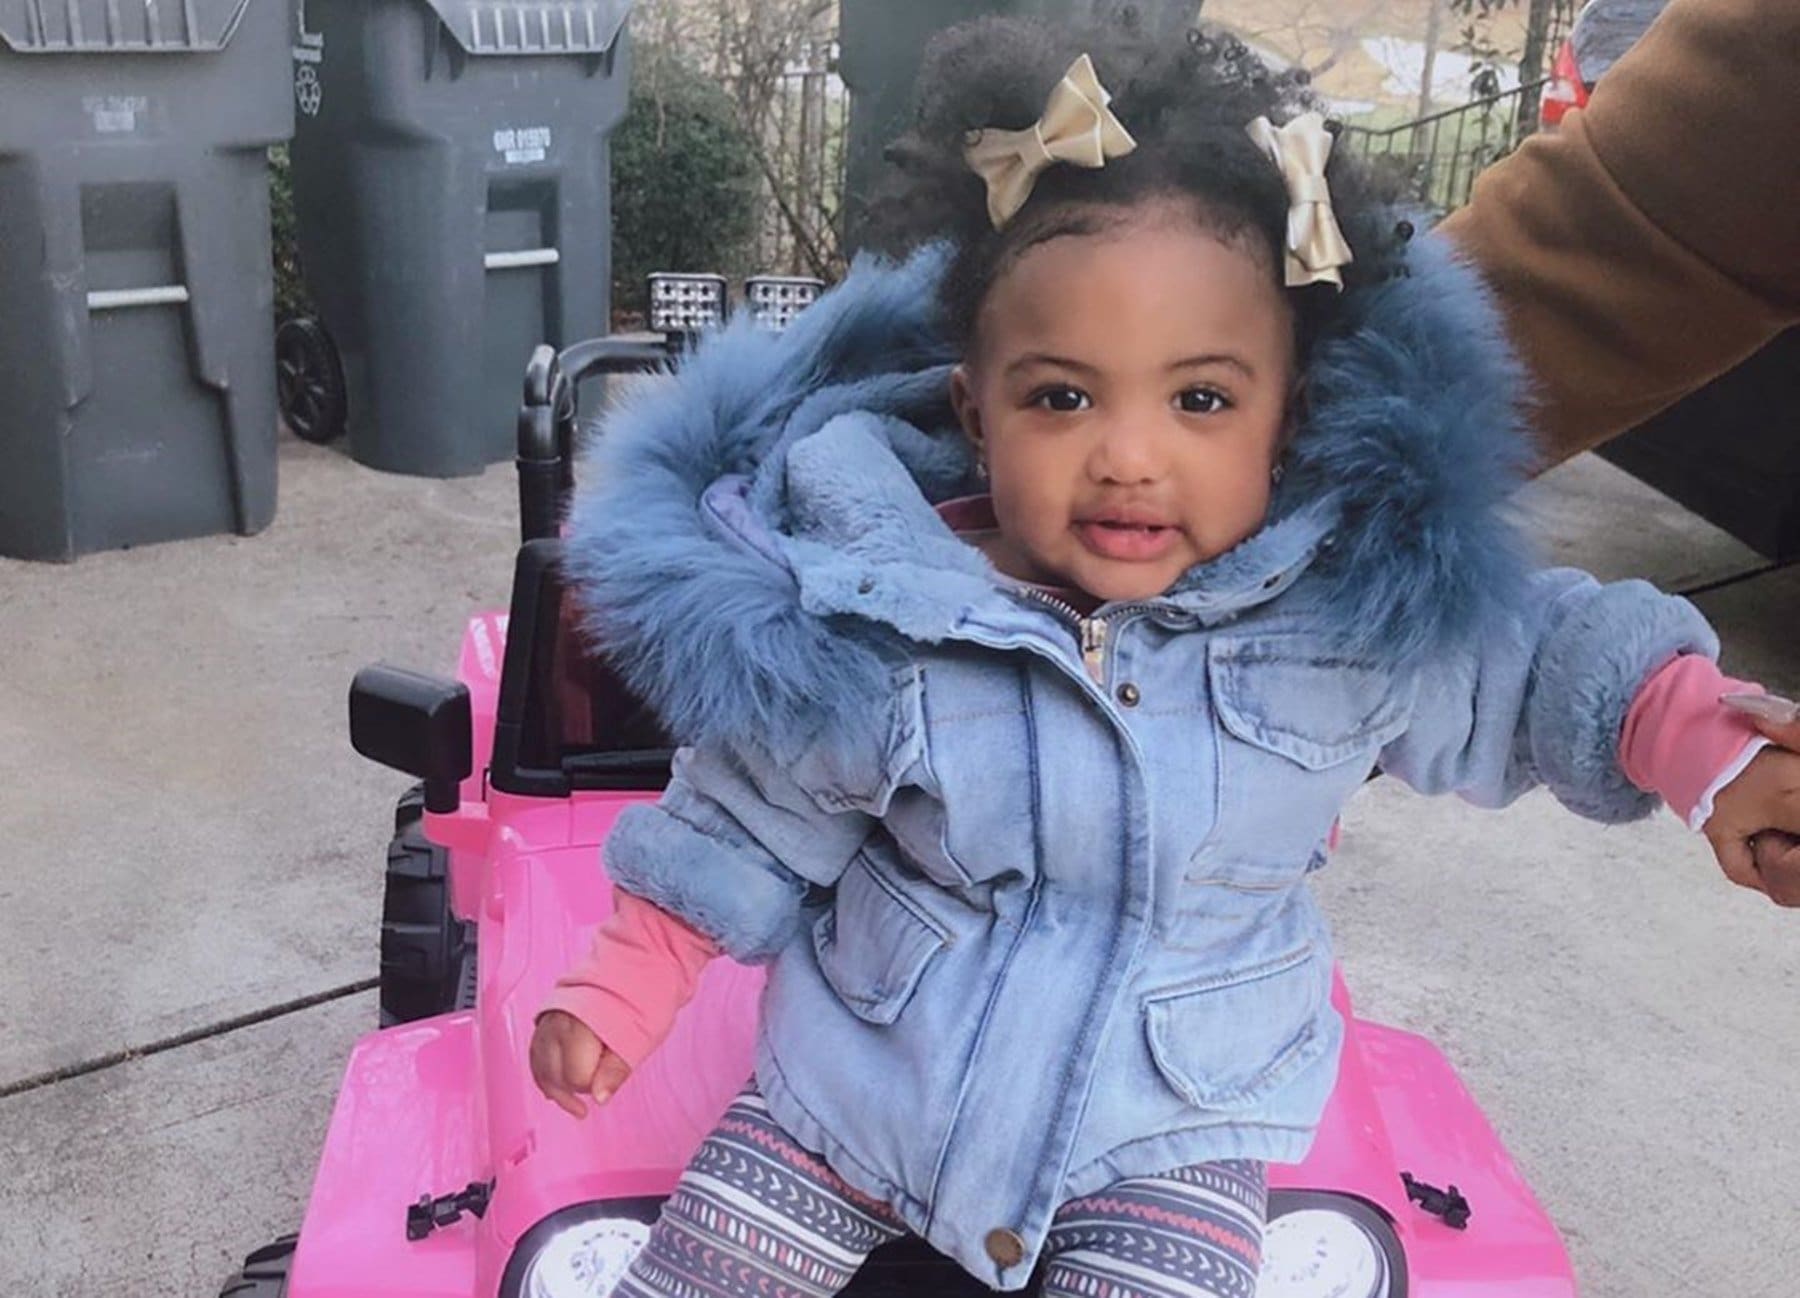 Porsha Williams' Video Featuring Her Baby Girl PJ Makes Fans' Day